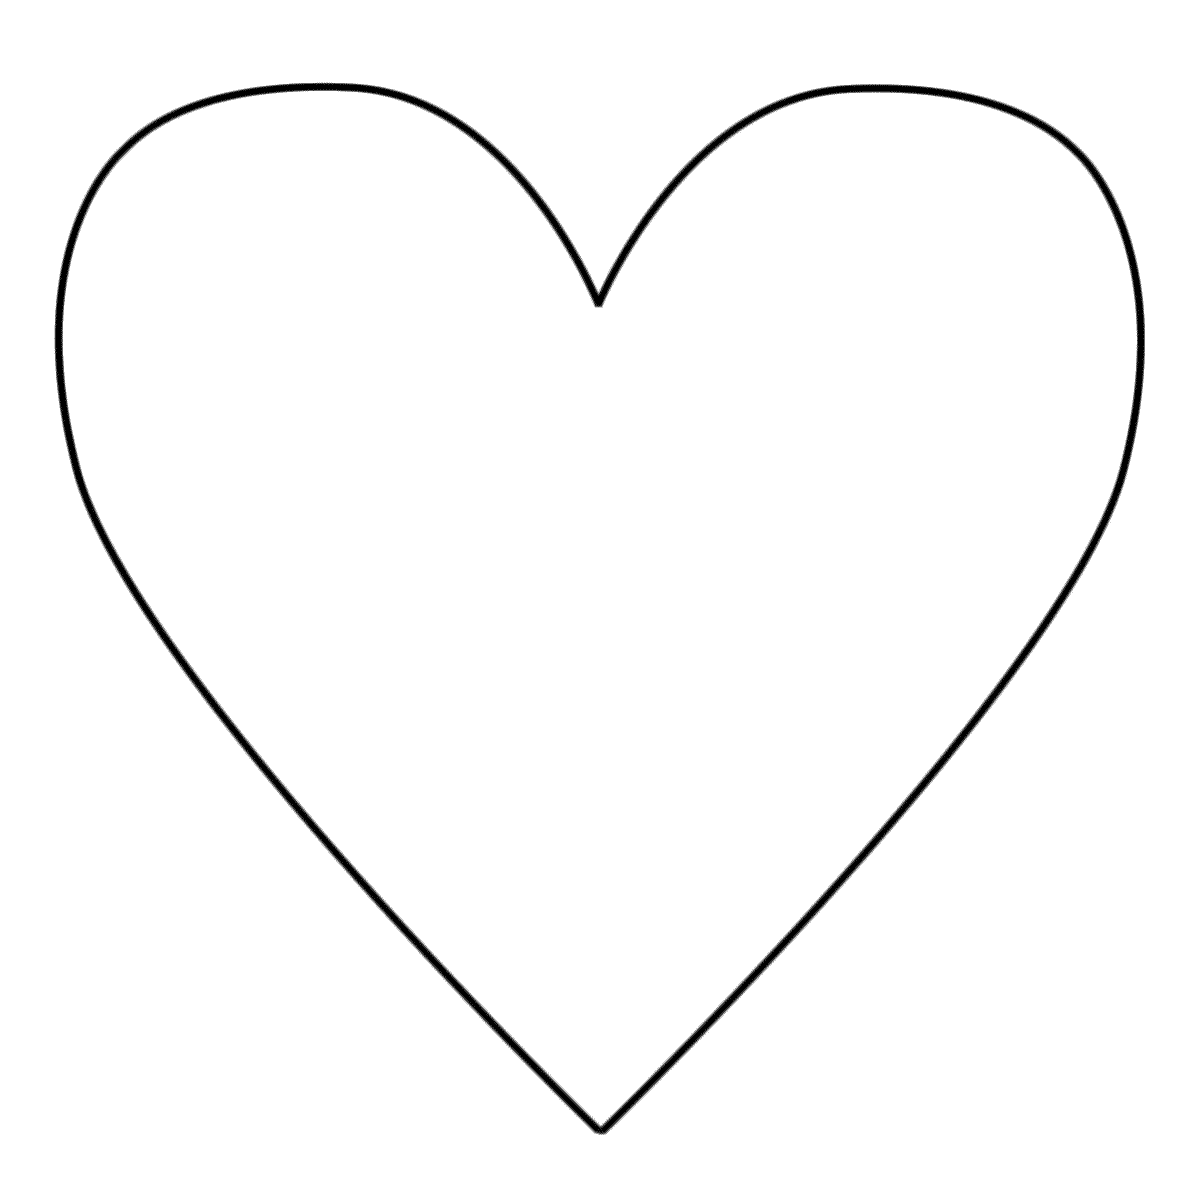 Heart Coloring Pages (7) - Coloring Kids